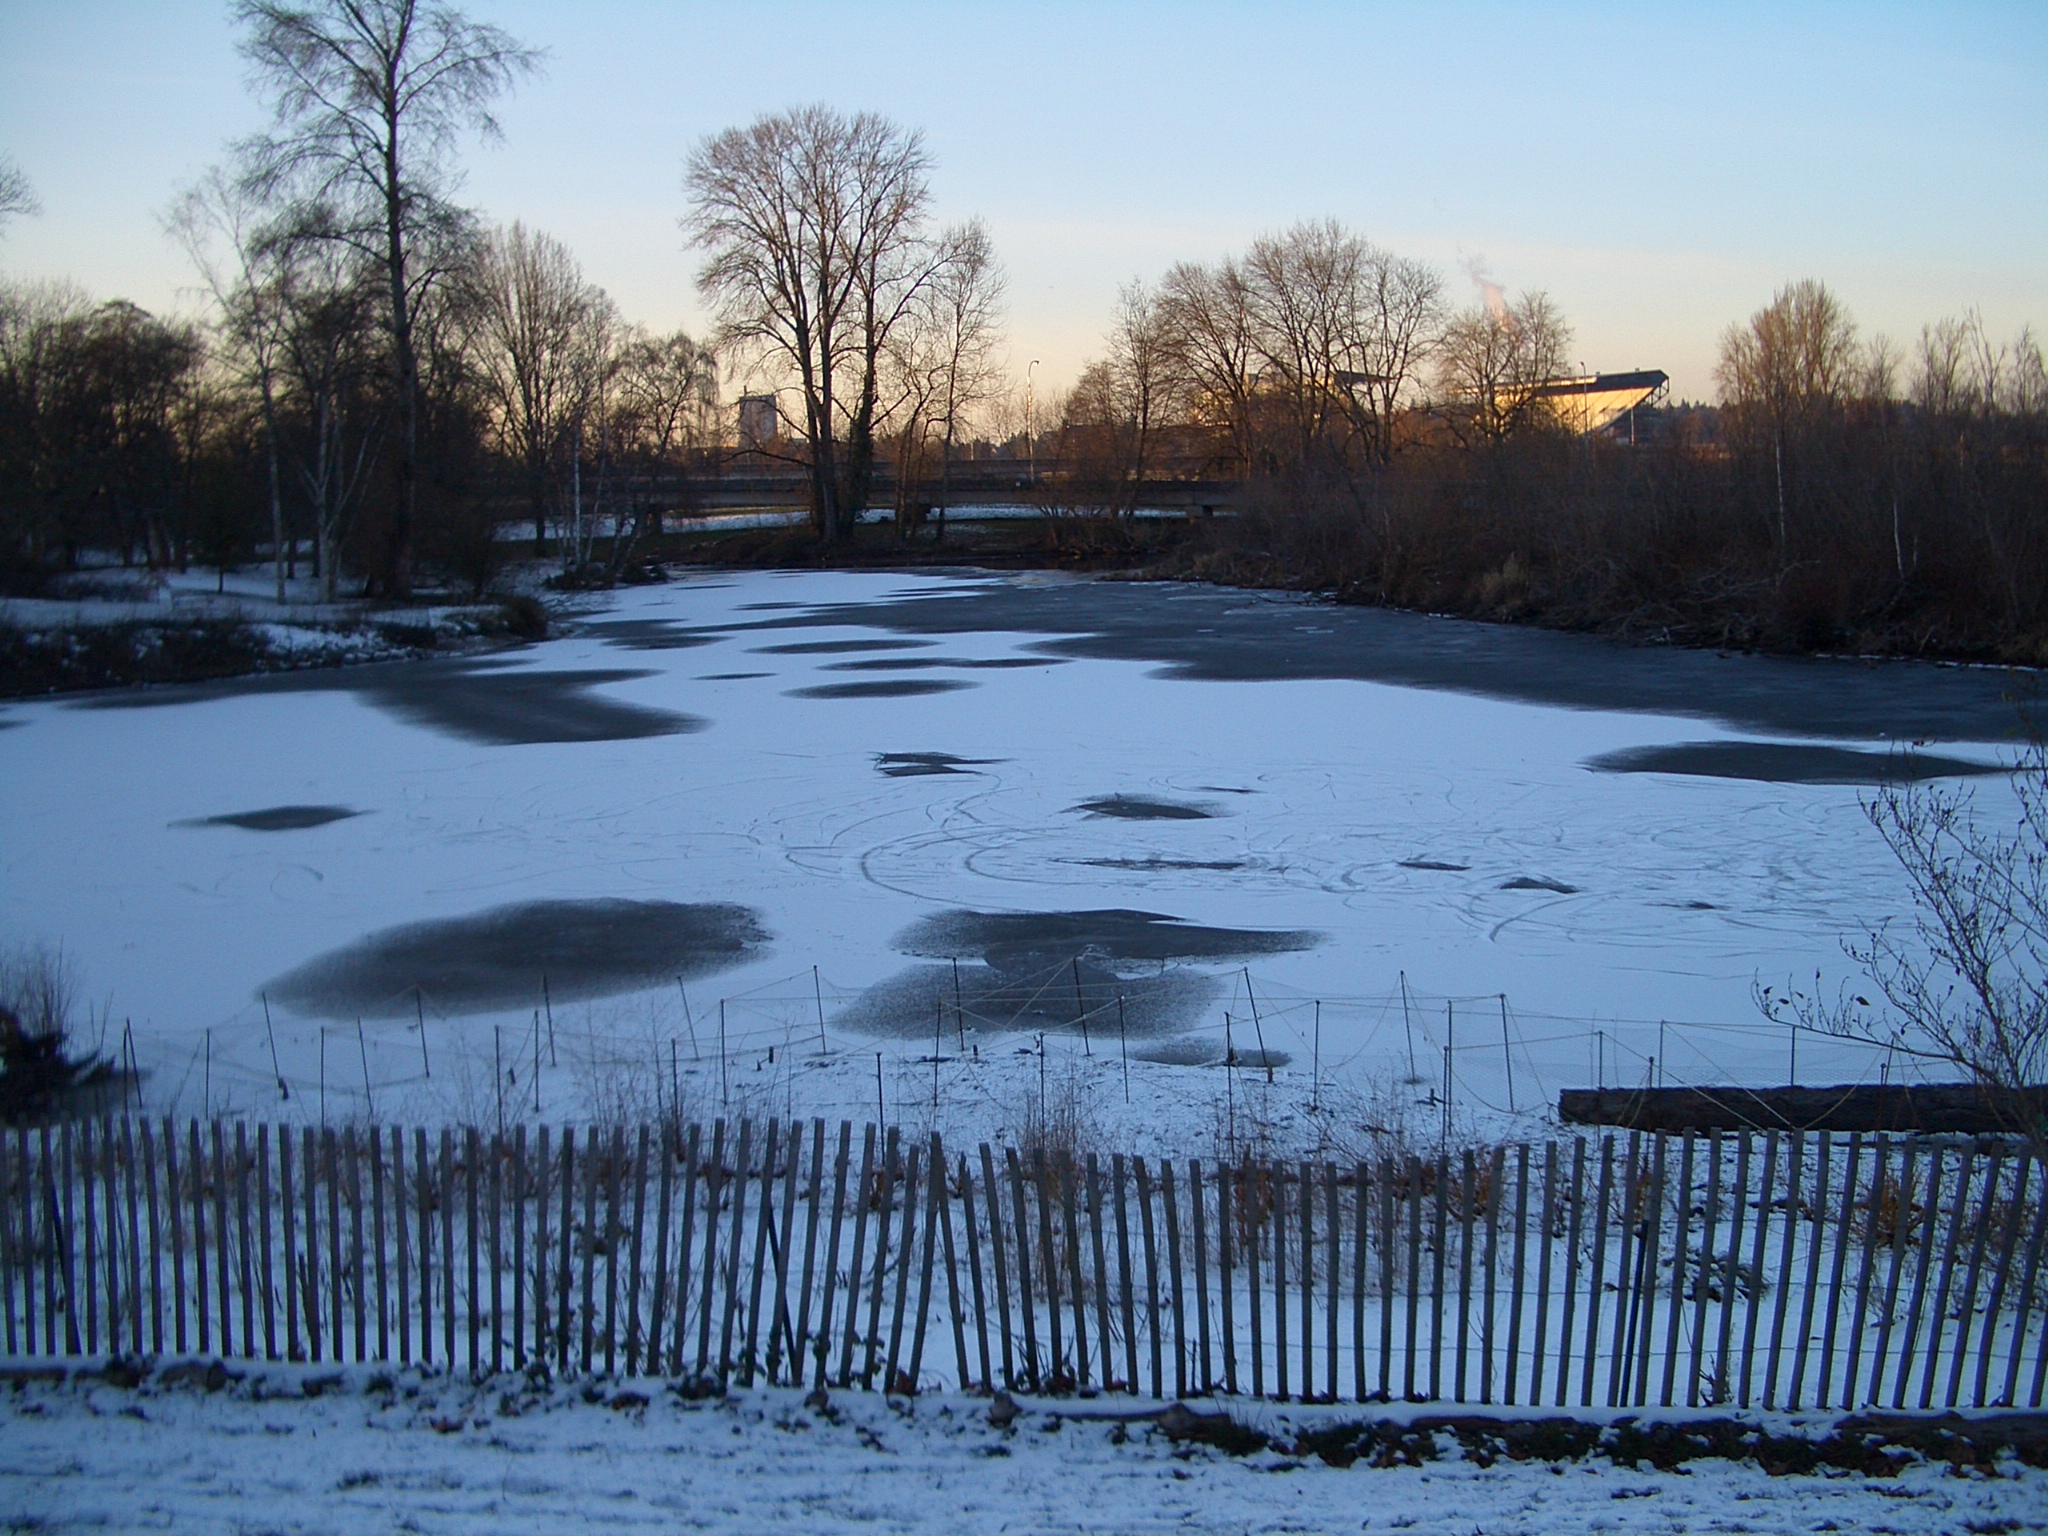 File:Frozen-pond-in-Union-Bay-Natural-Area-2898.jpg - Wikimedia Commons